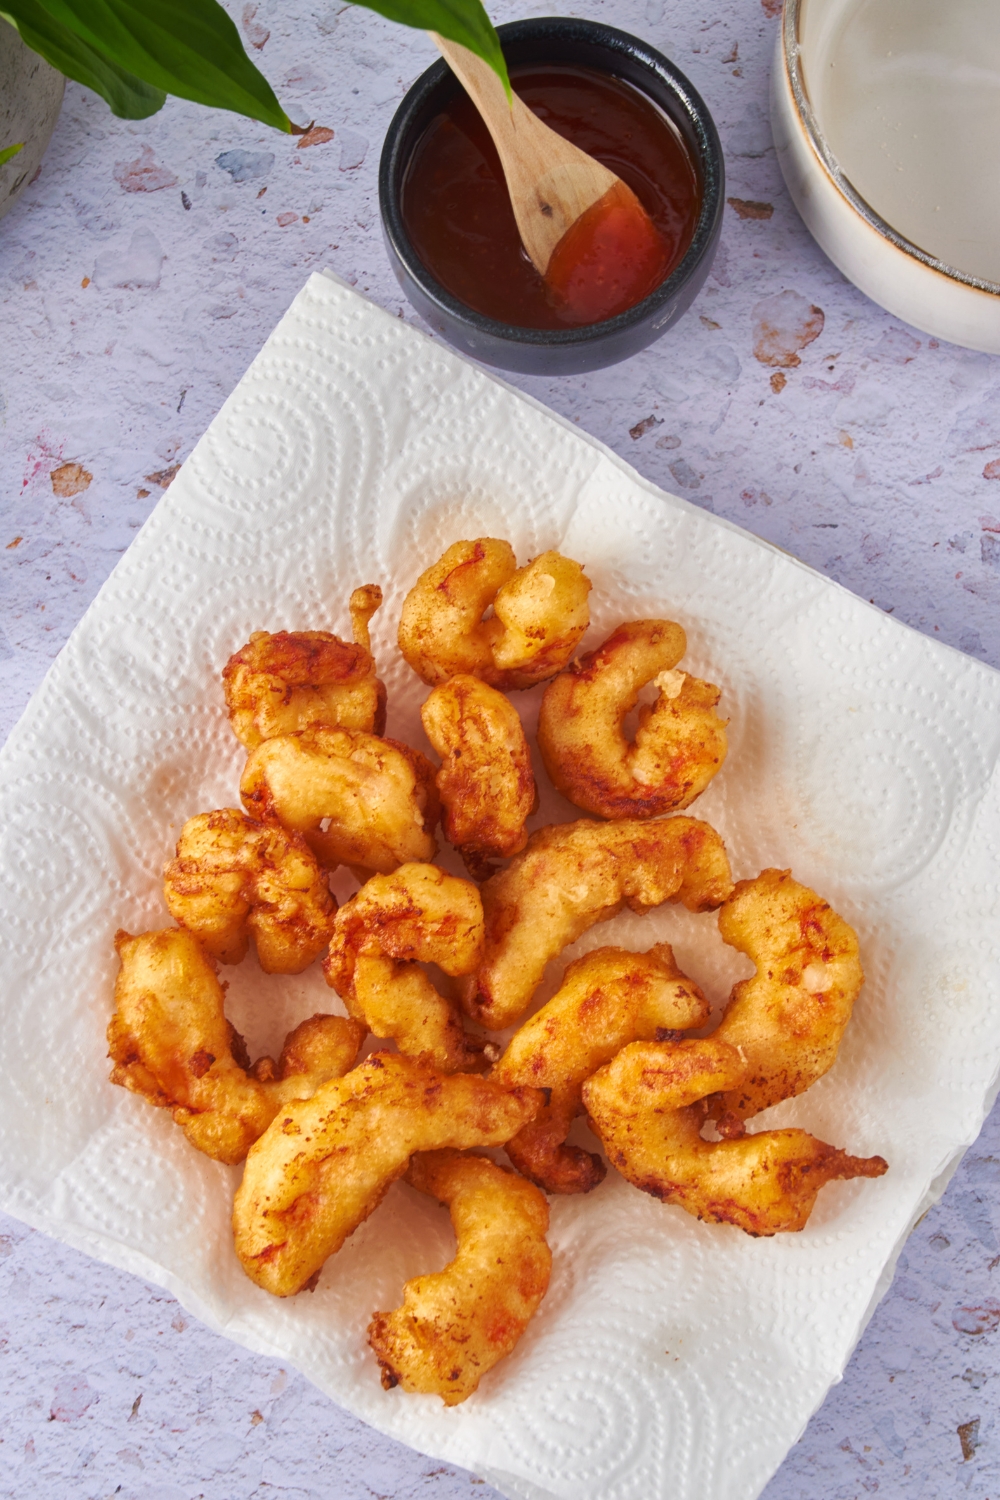 Overhead of a pile of fried shrimp on a plate lined with paper towels.